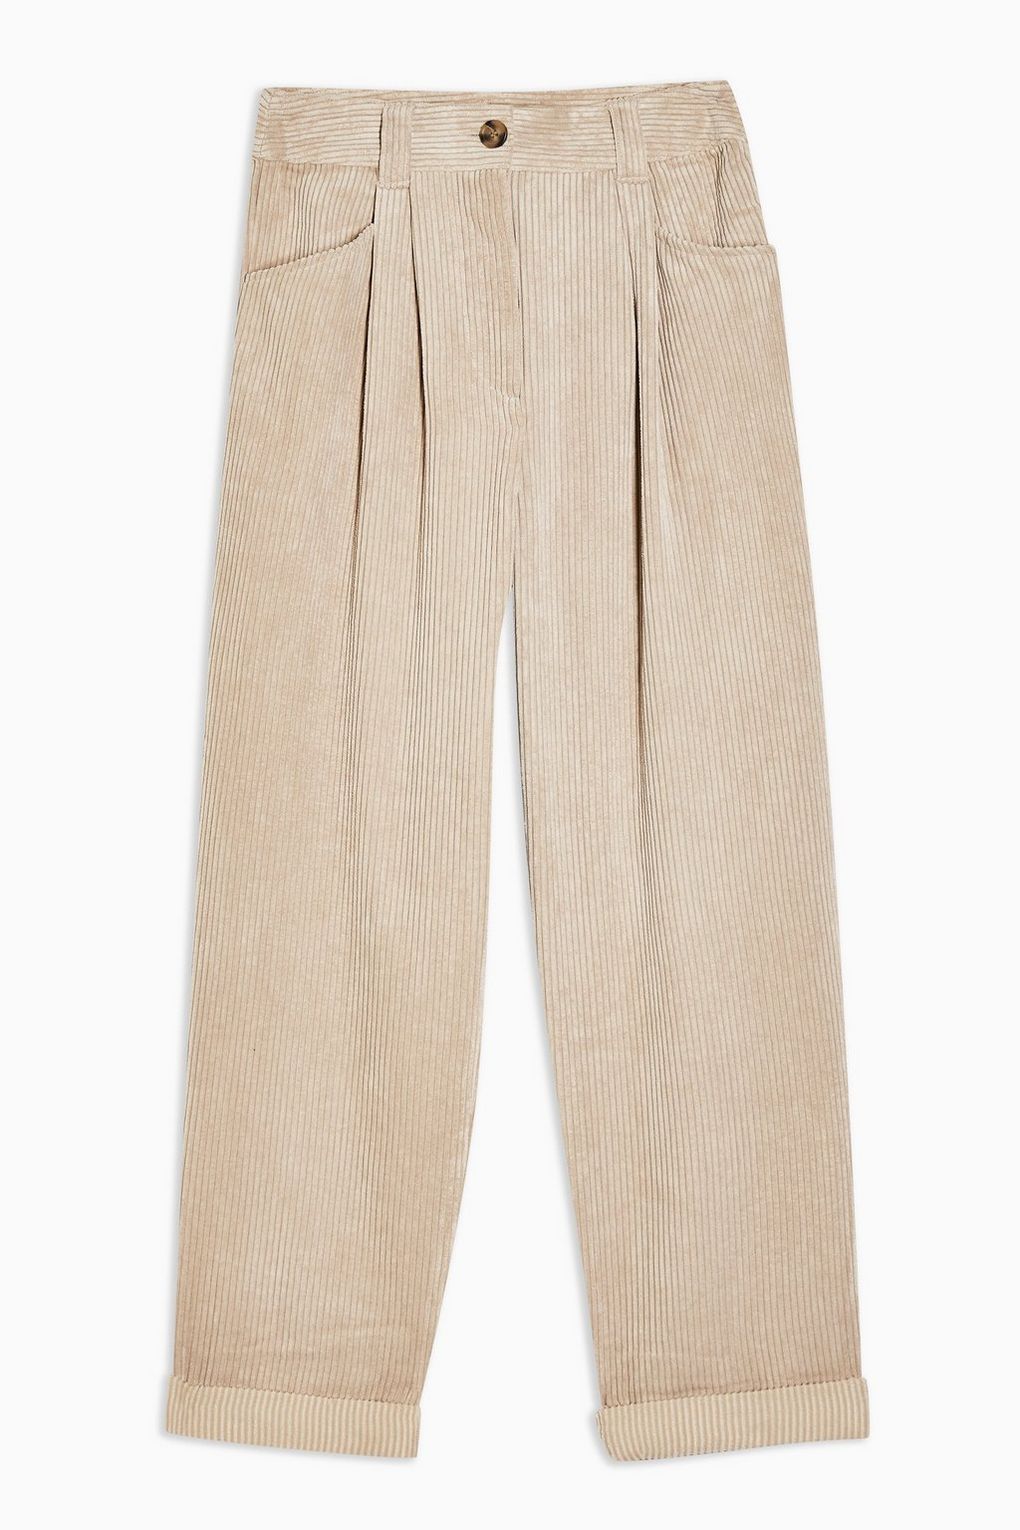 Topshop Corduroy Wide Leg Trousers  Monochrome Outfits Are Always a Good  Idea but Theyre Really Having a Moment  POPSUGAR Fashion Photo 34